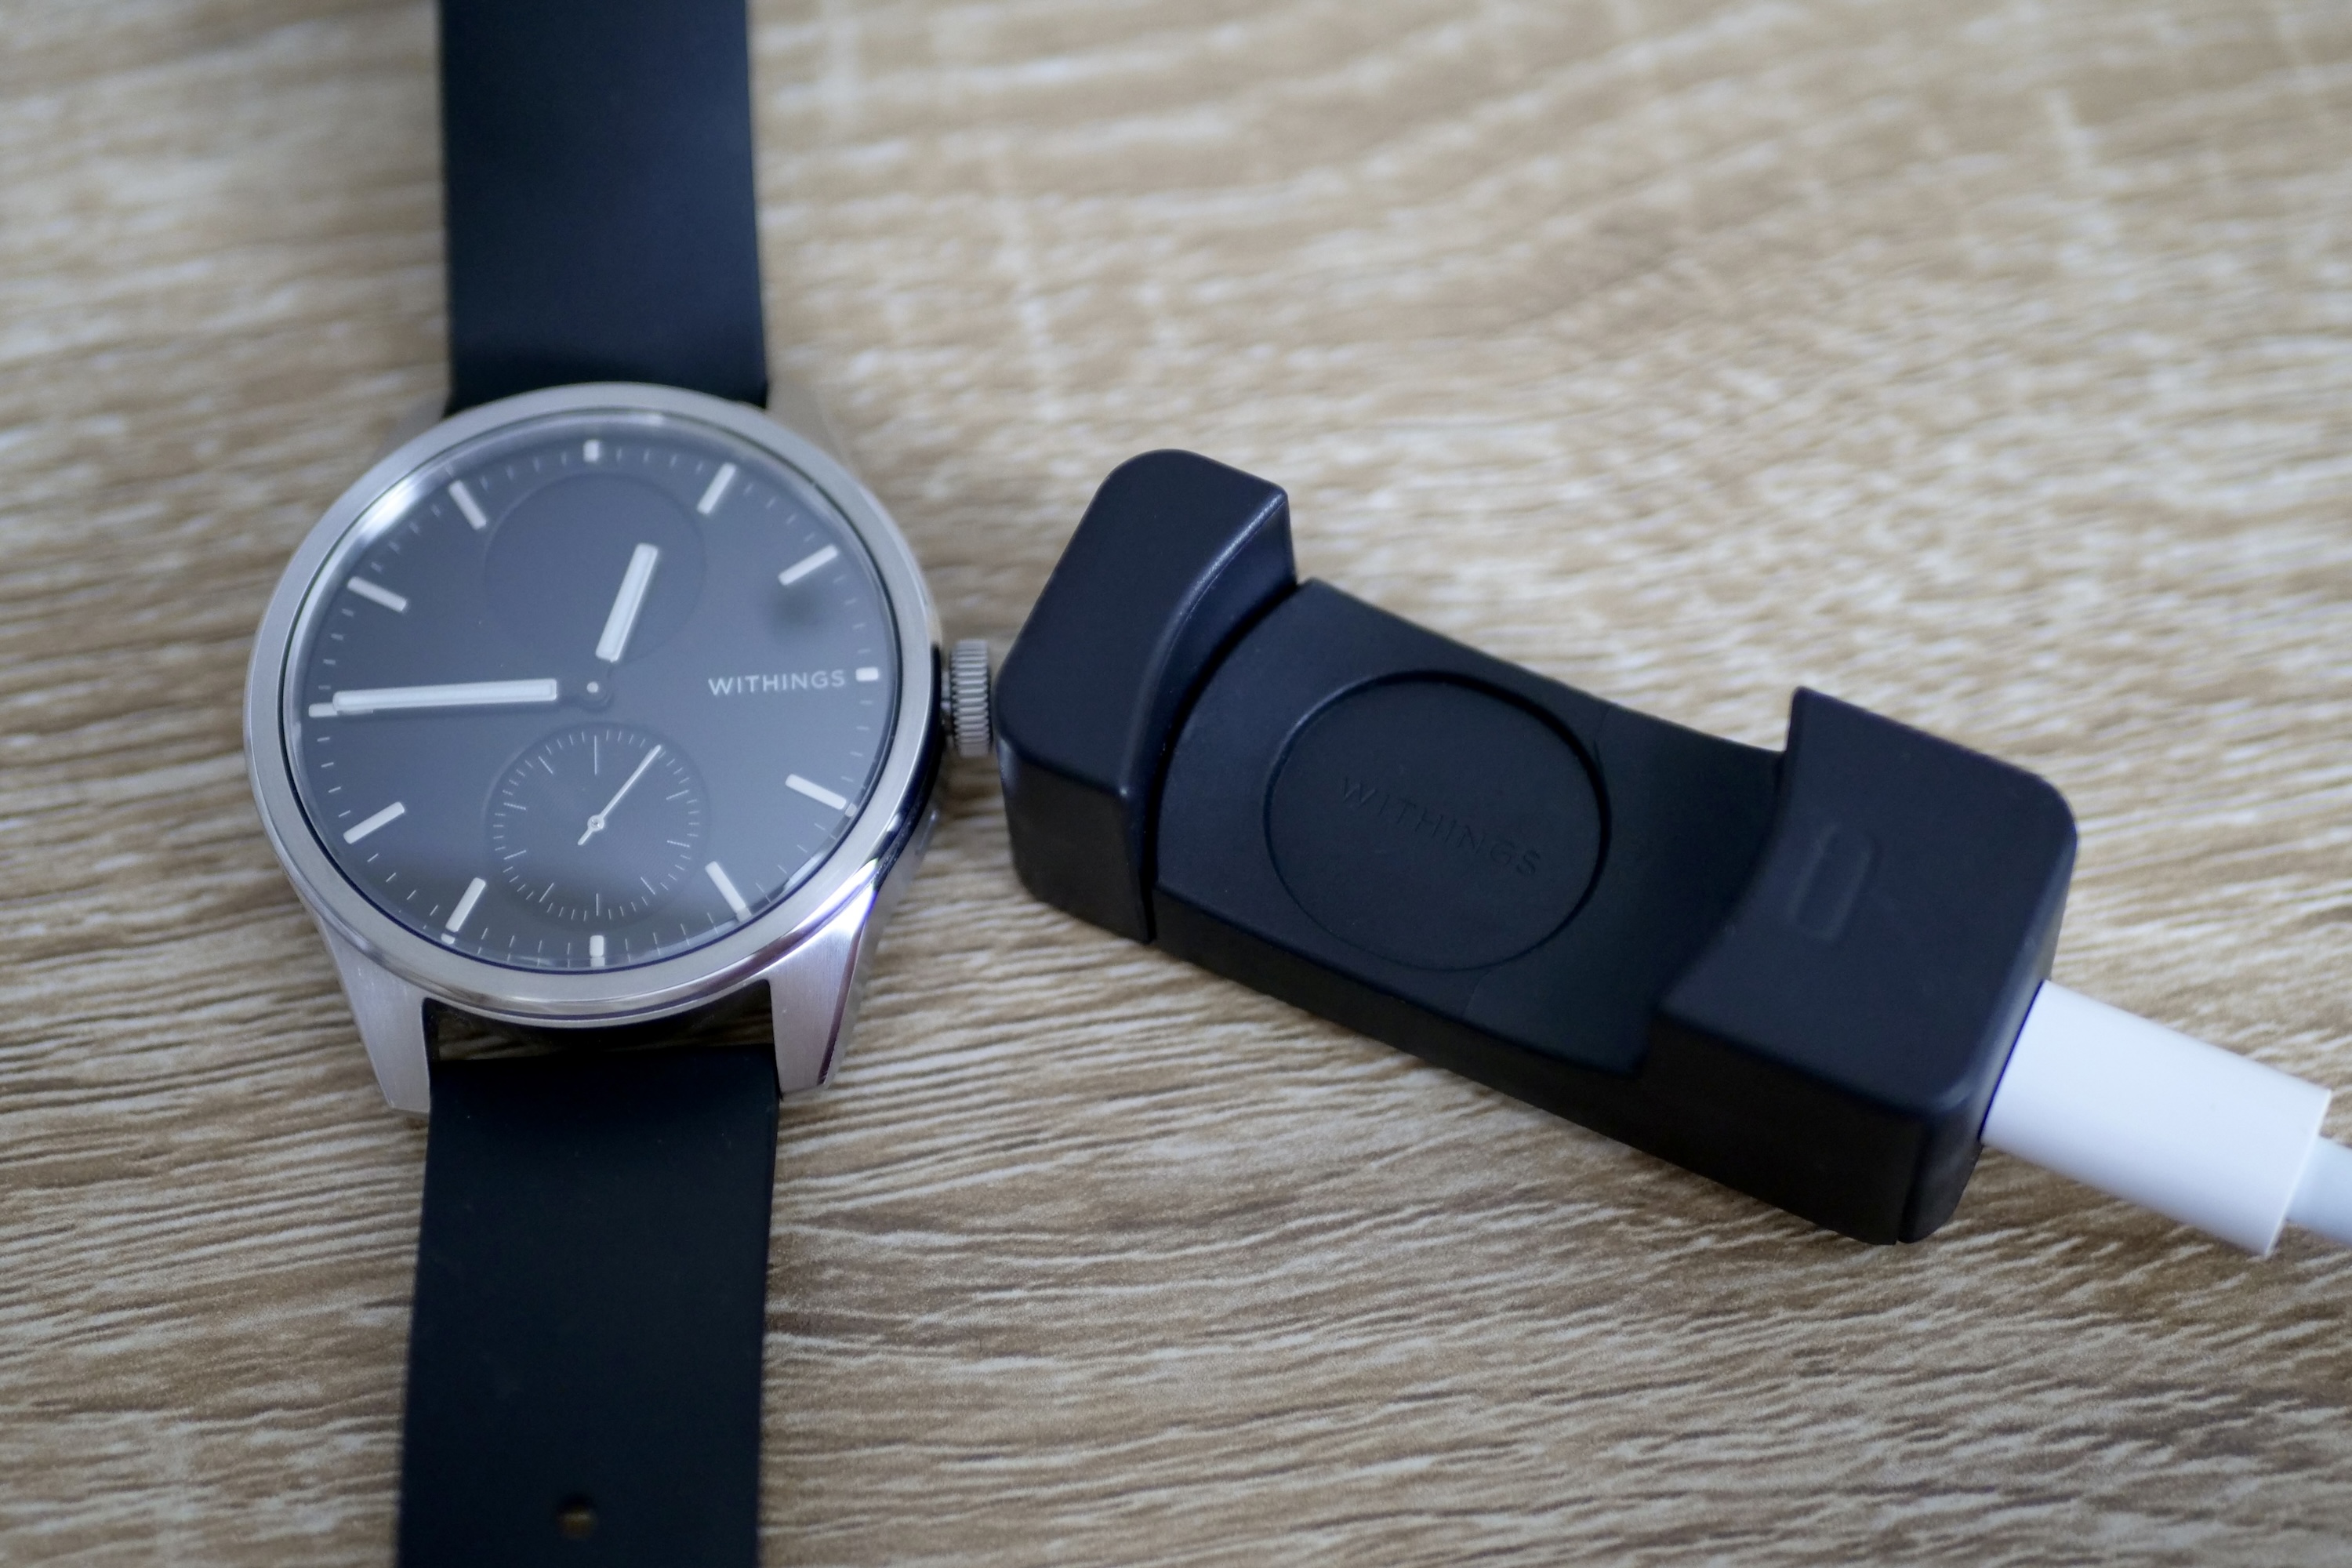 Withings ScanWatch 2: Powerful Health and Fitness Companion